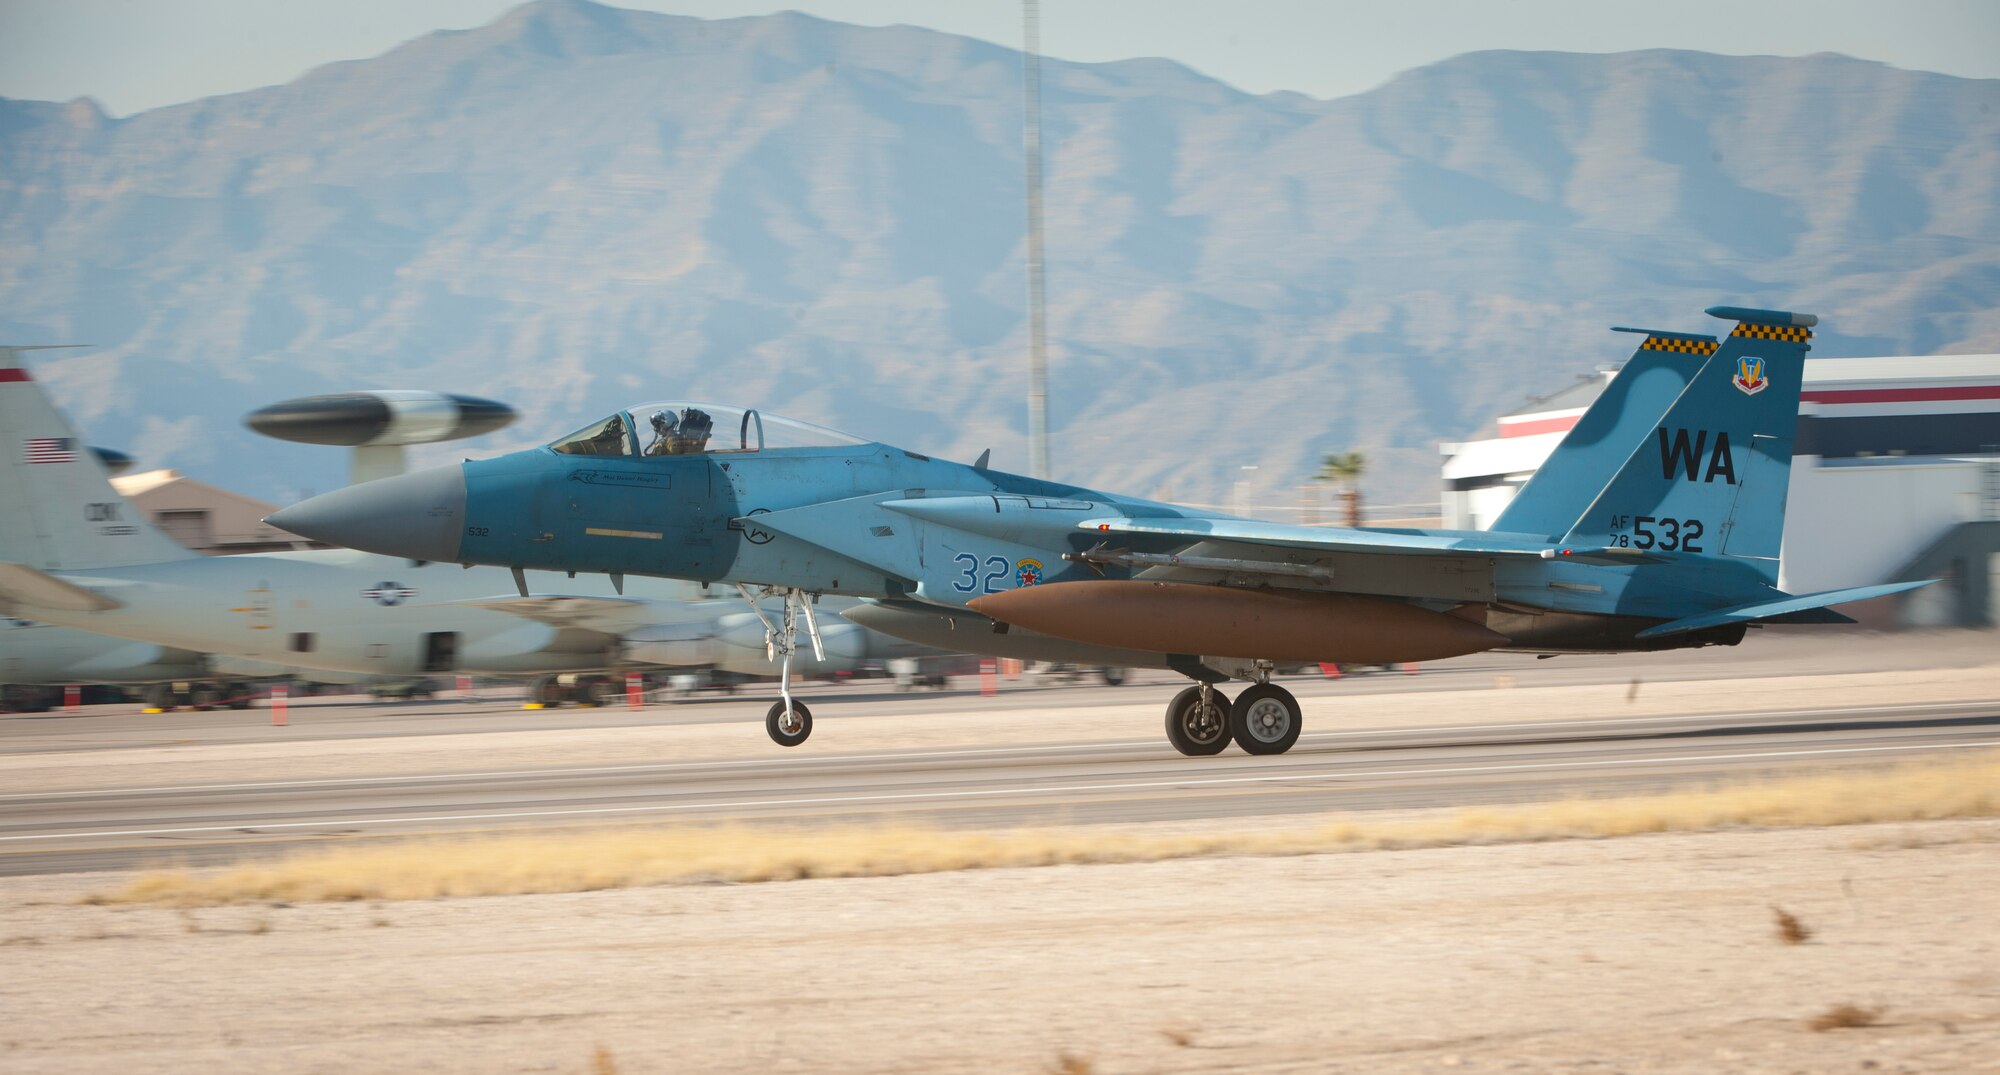 An F-15C Eagle assigned to the 64th Aggressor Squadron, lands following the completion of a Red Flag 15-1 training sortie at Nellis Air Force Base, Nev., Feb. 4, 2015. Pilots and aircrews of the 64 AGRS, paired with space, cyber and intelligence experts within the 57th Adversary Tactics Group, present a credible threat picture for Red Flag coalition “Blue Force” participants. . (U.S. Air Force photo by Airman 1st Class Joshua Kleinholz)